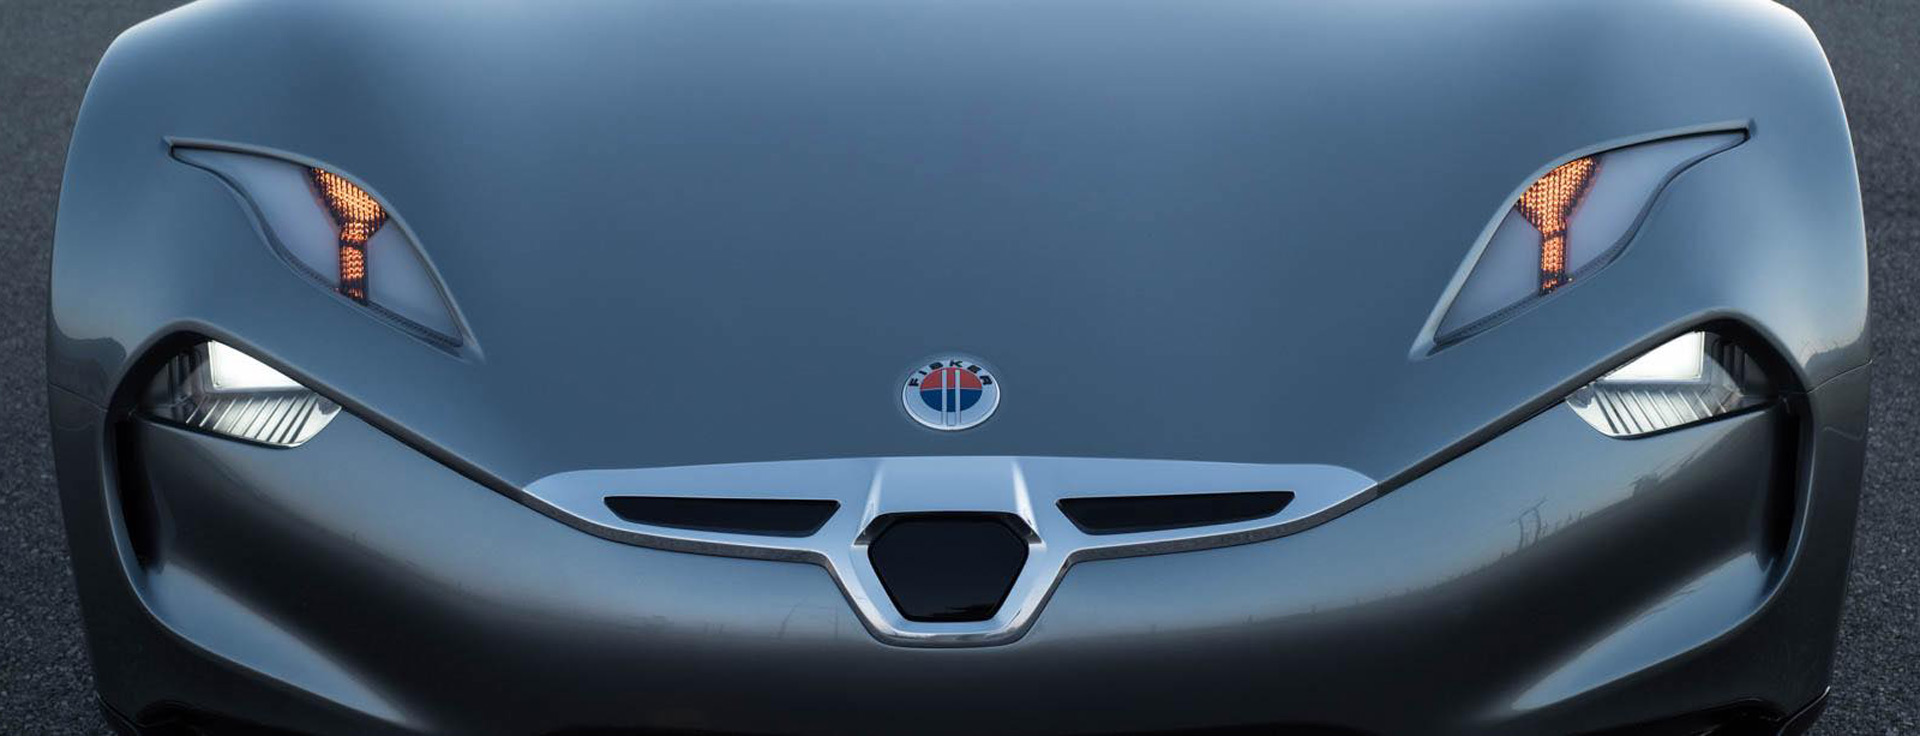 all electric fisker emotion orders open june 30 starting at